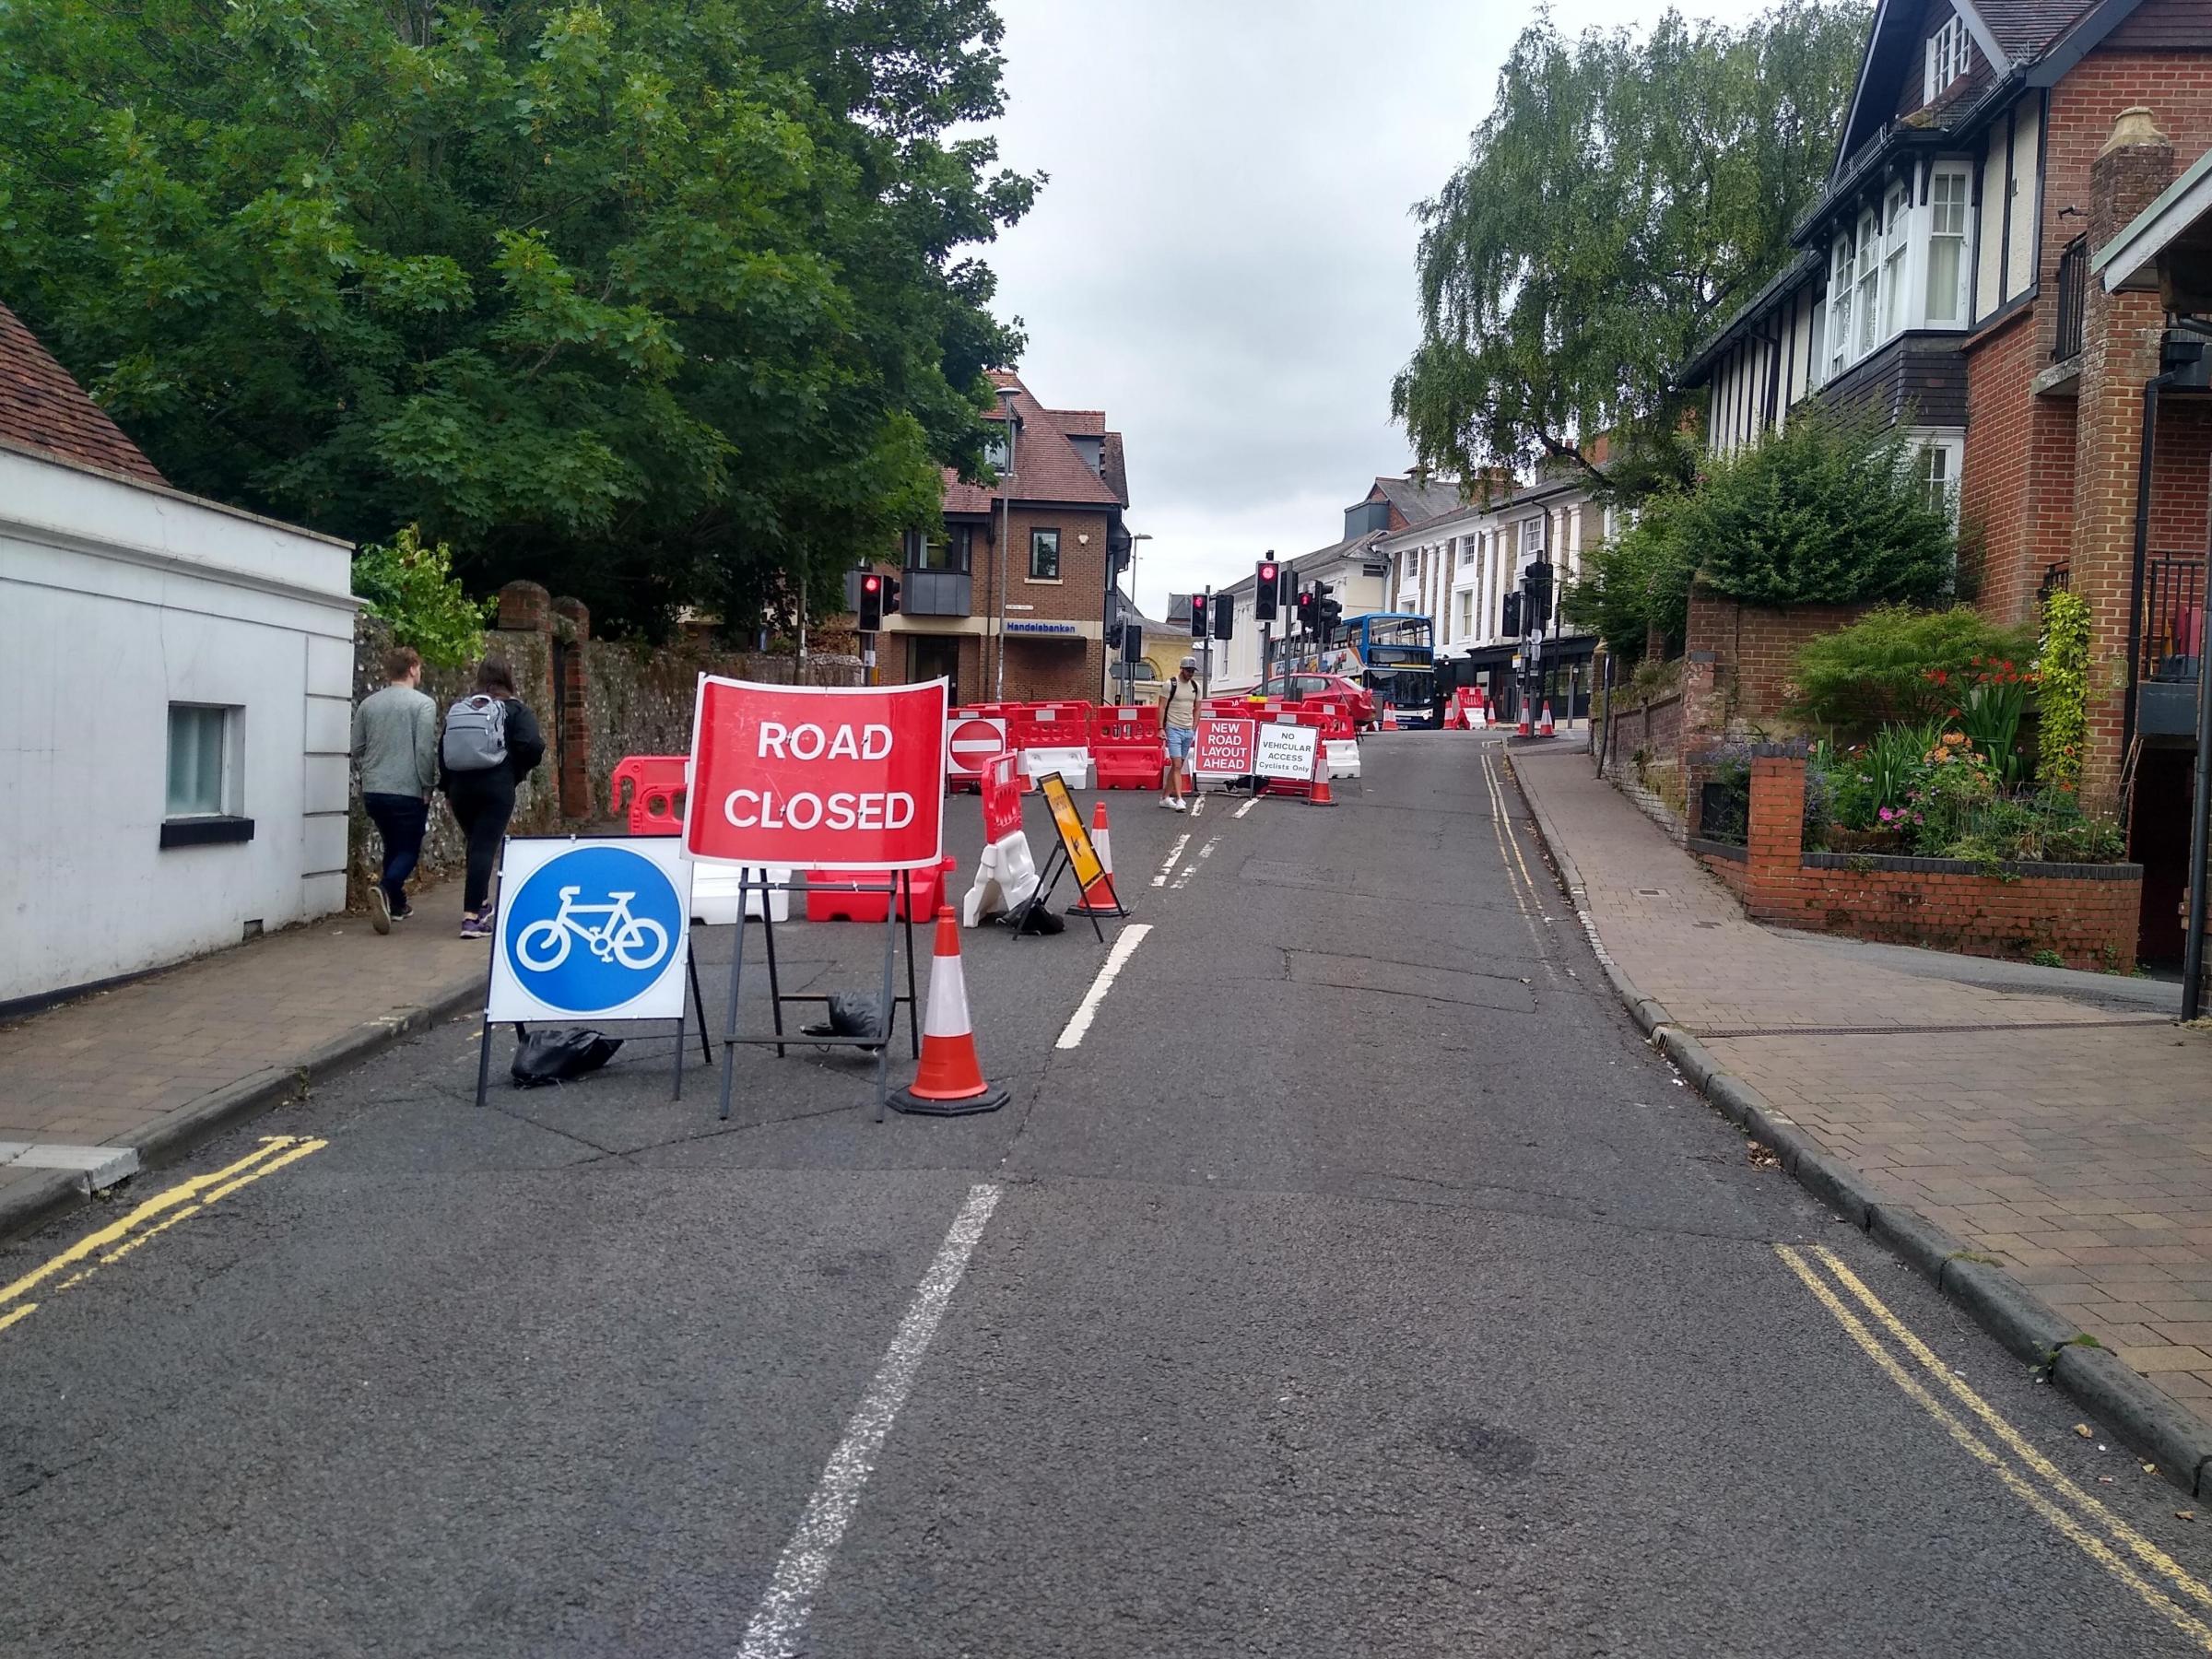 Hyde Street: currently closed to through traffic